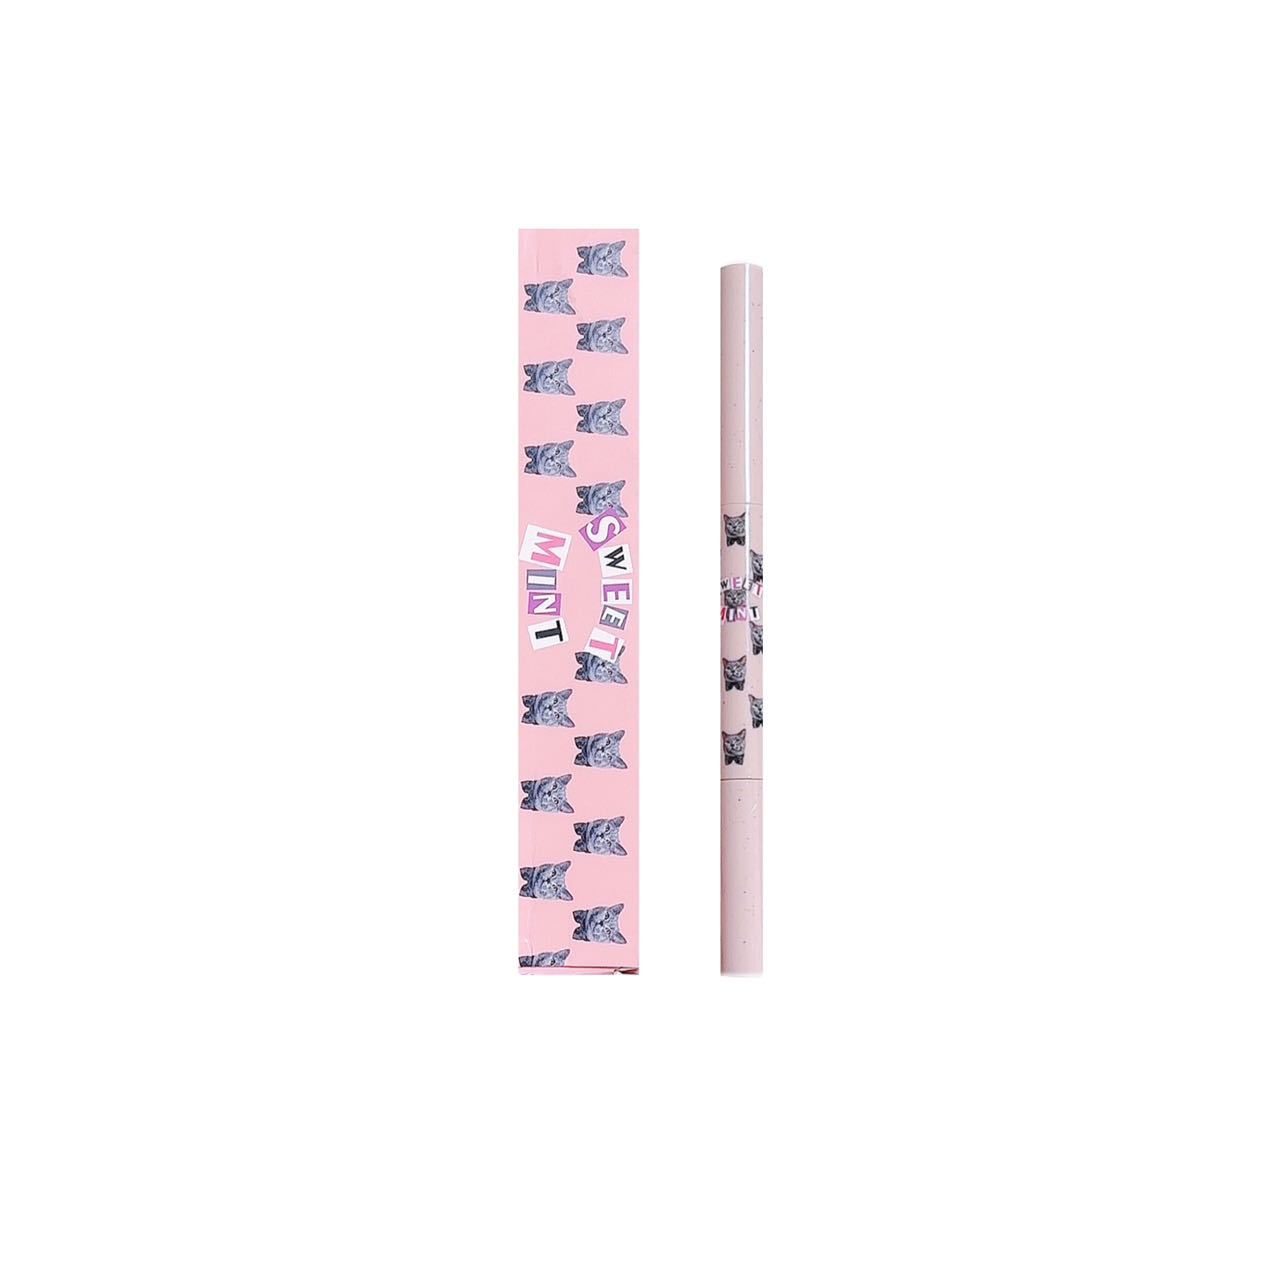 Sweetmint Double-Headed Blade Eyebrow Cream Build Natural Three-Dimensional Eyebrow Waterproof Sweat-Proof Two-in-One Eyebrow Pencil